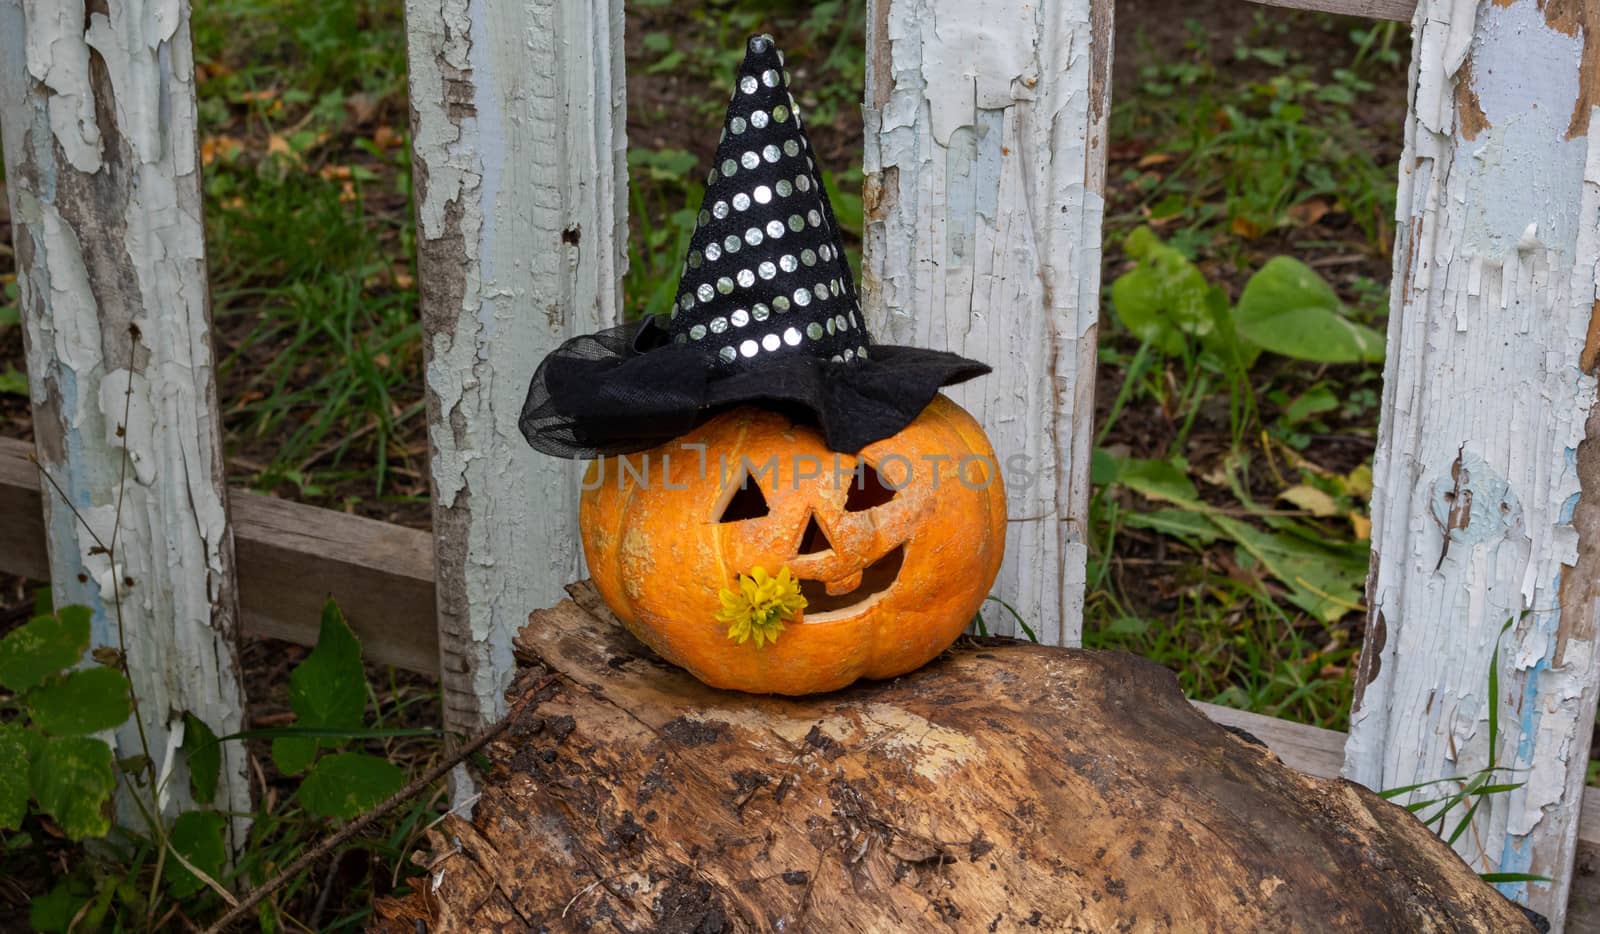 A cheerful pumpkin in a Witch's hat is sitting on a stump near the fence.The Concept Of Halloween.